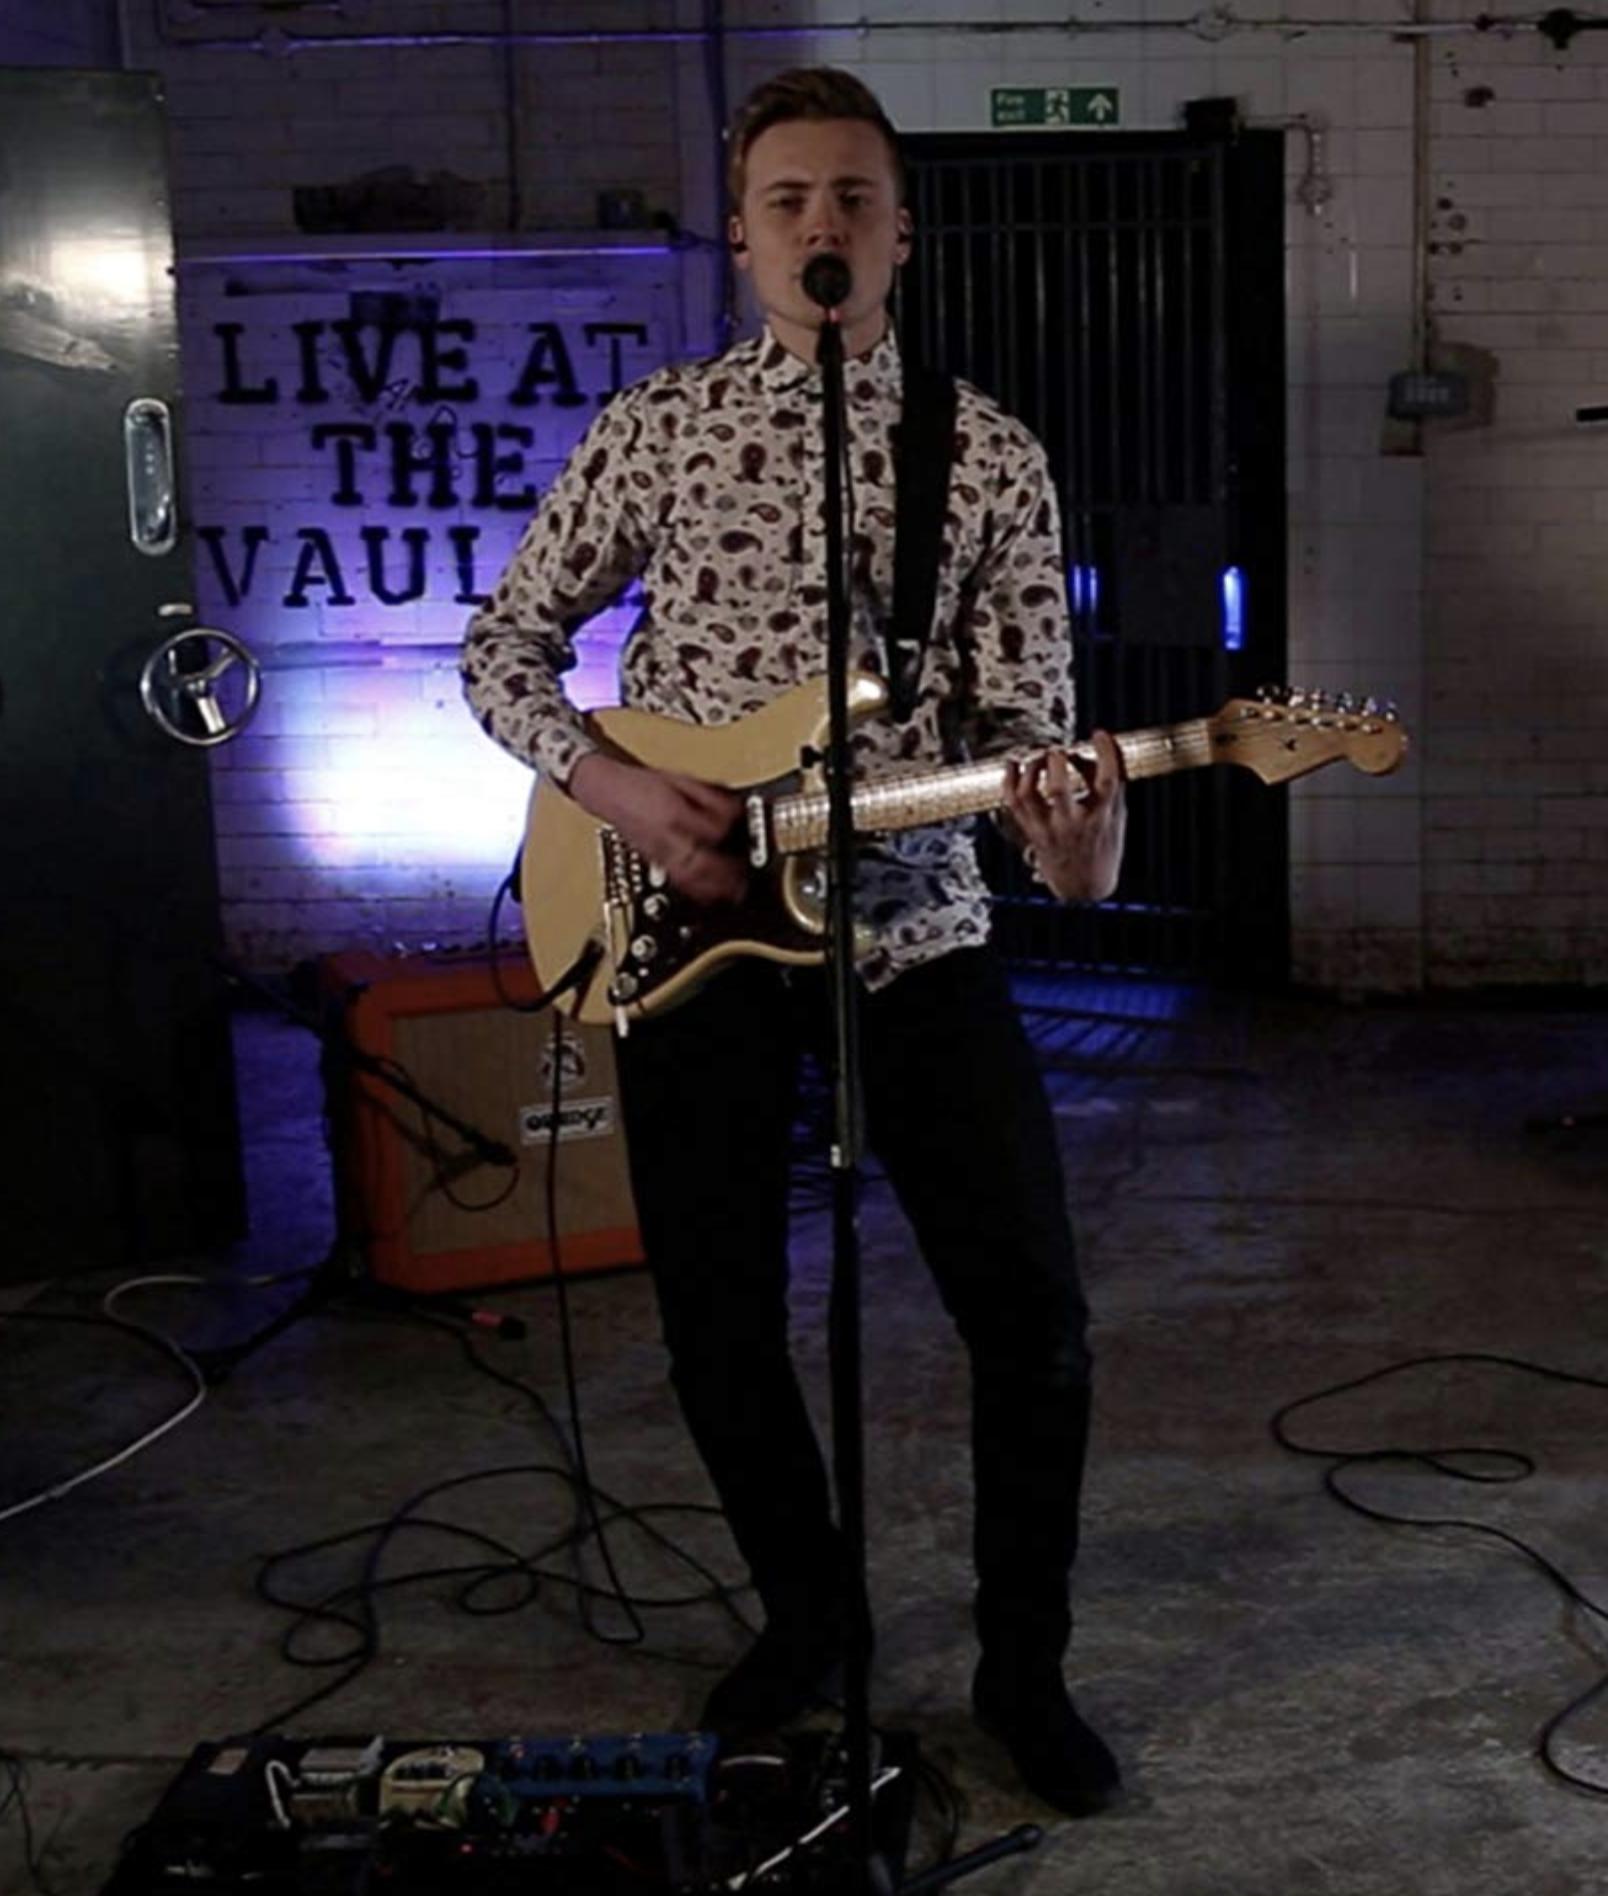 Live at the Vaults (2015)